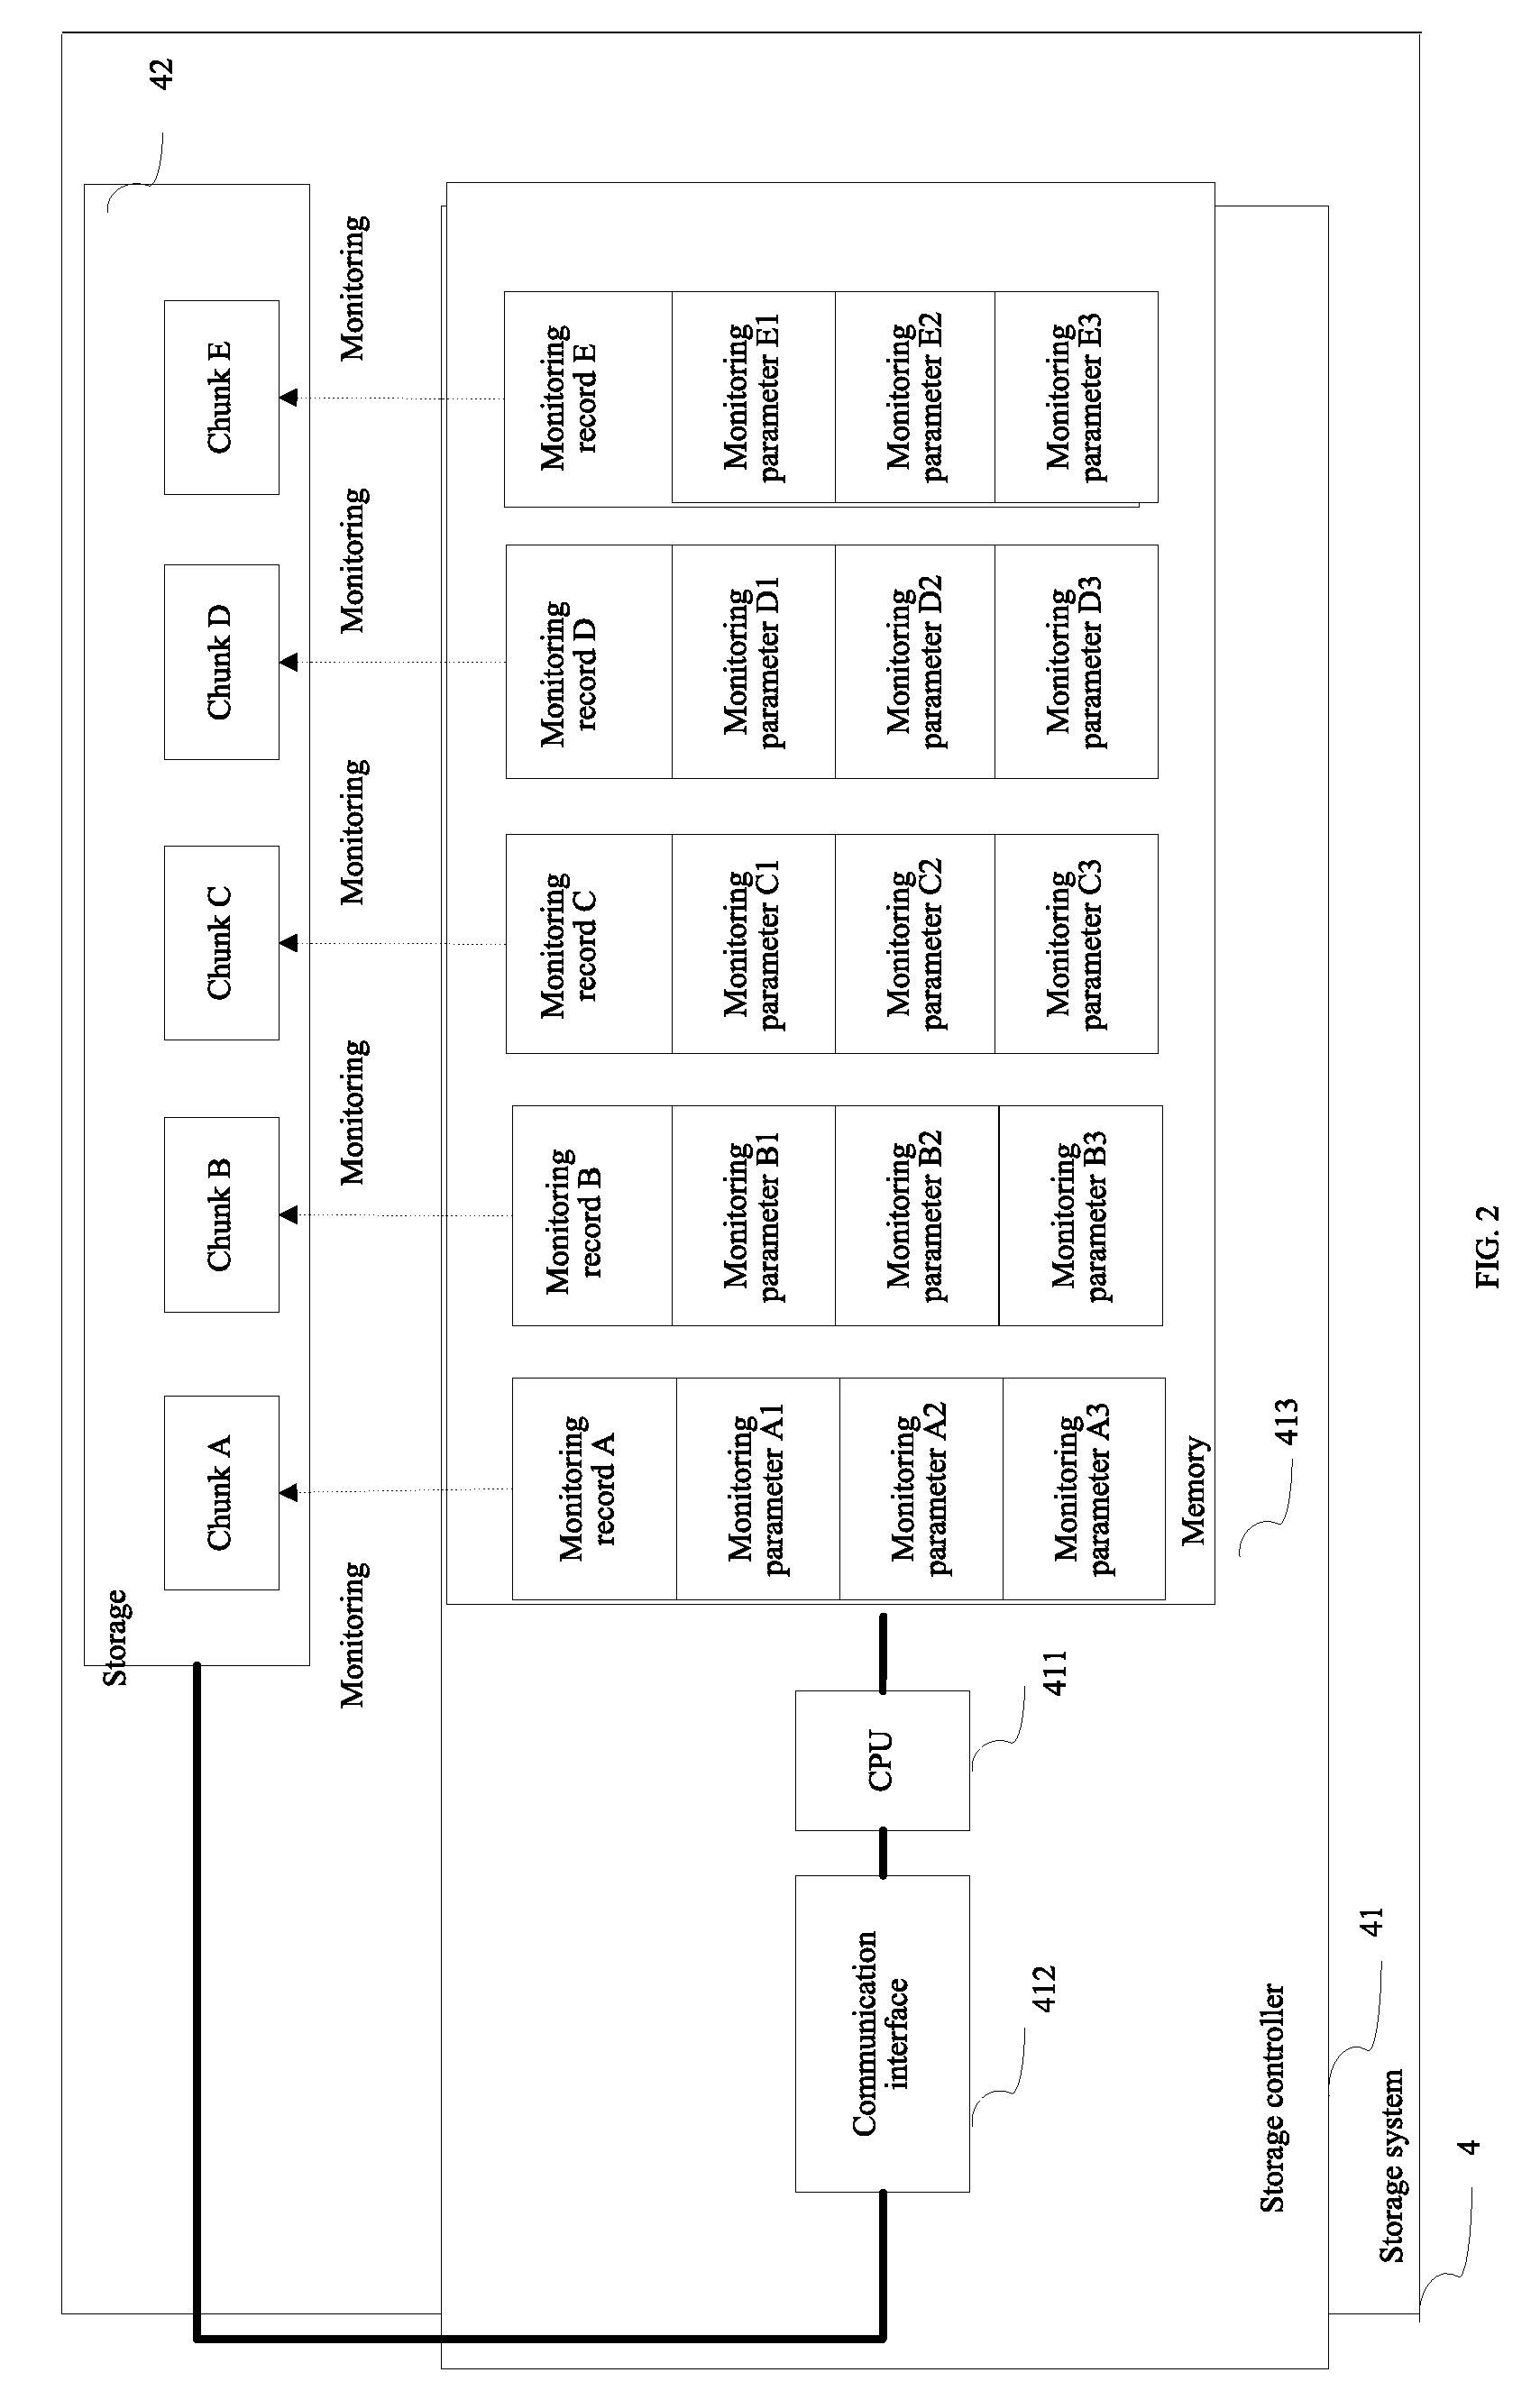 Monitoring record management method and device